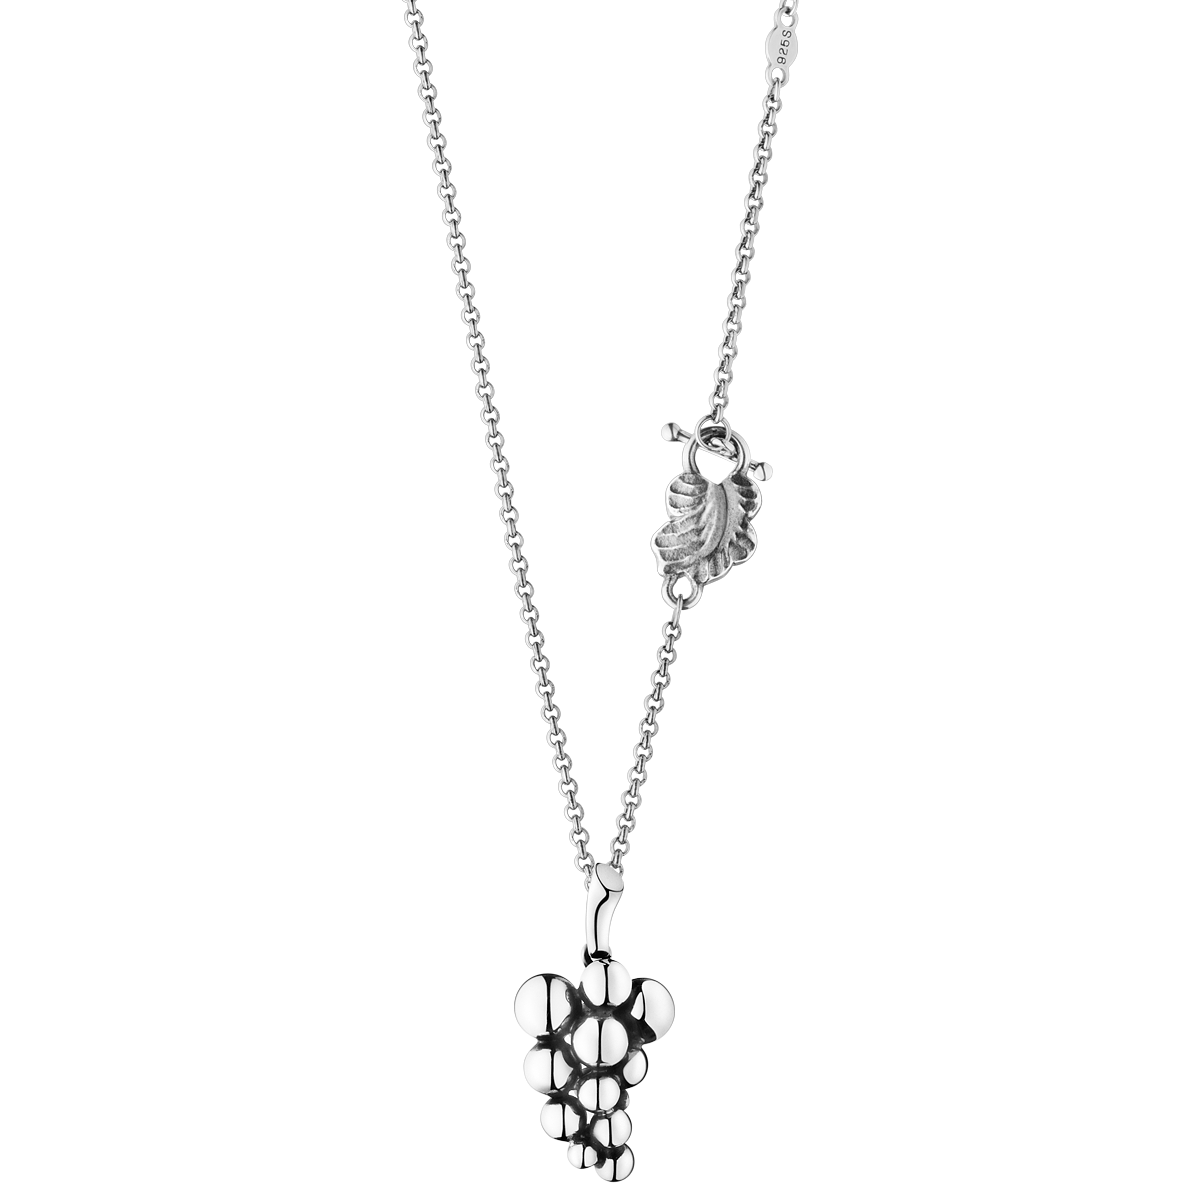 MOONLIGHT GRAPES pendant - sterling silver, small